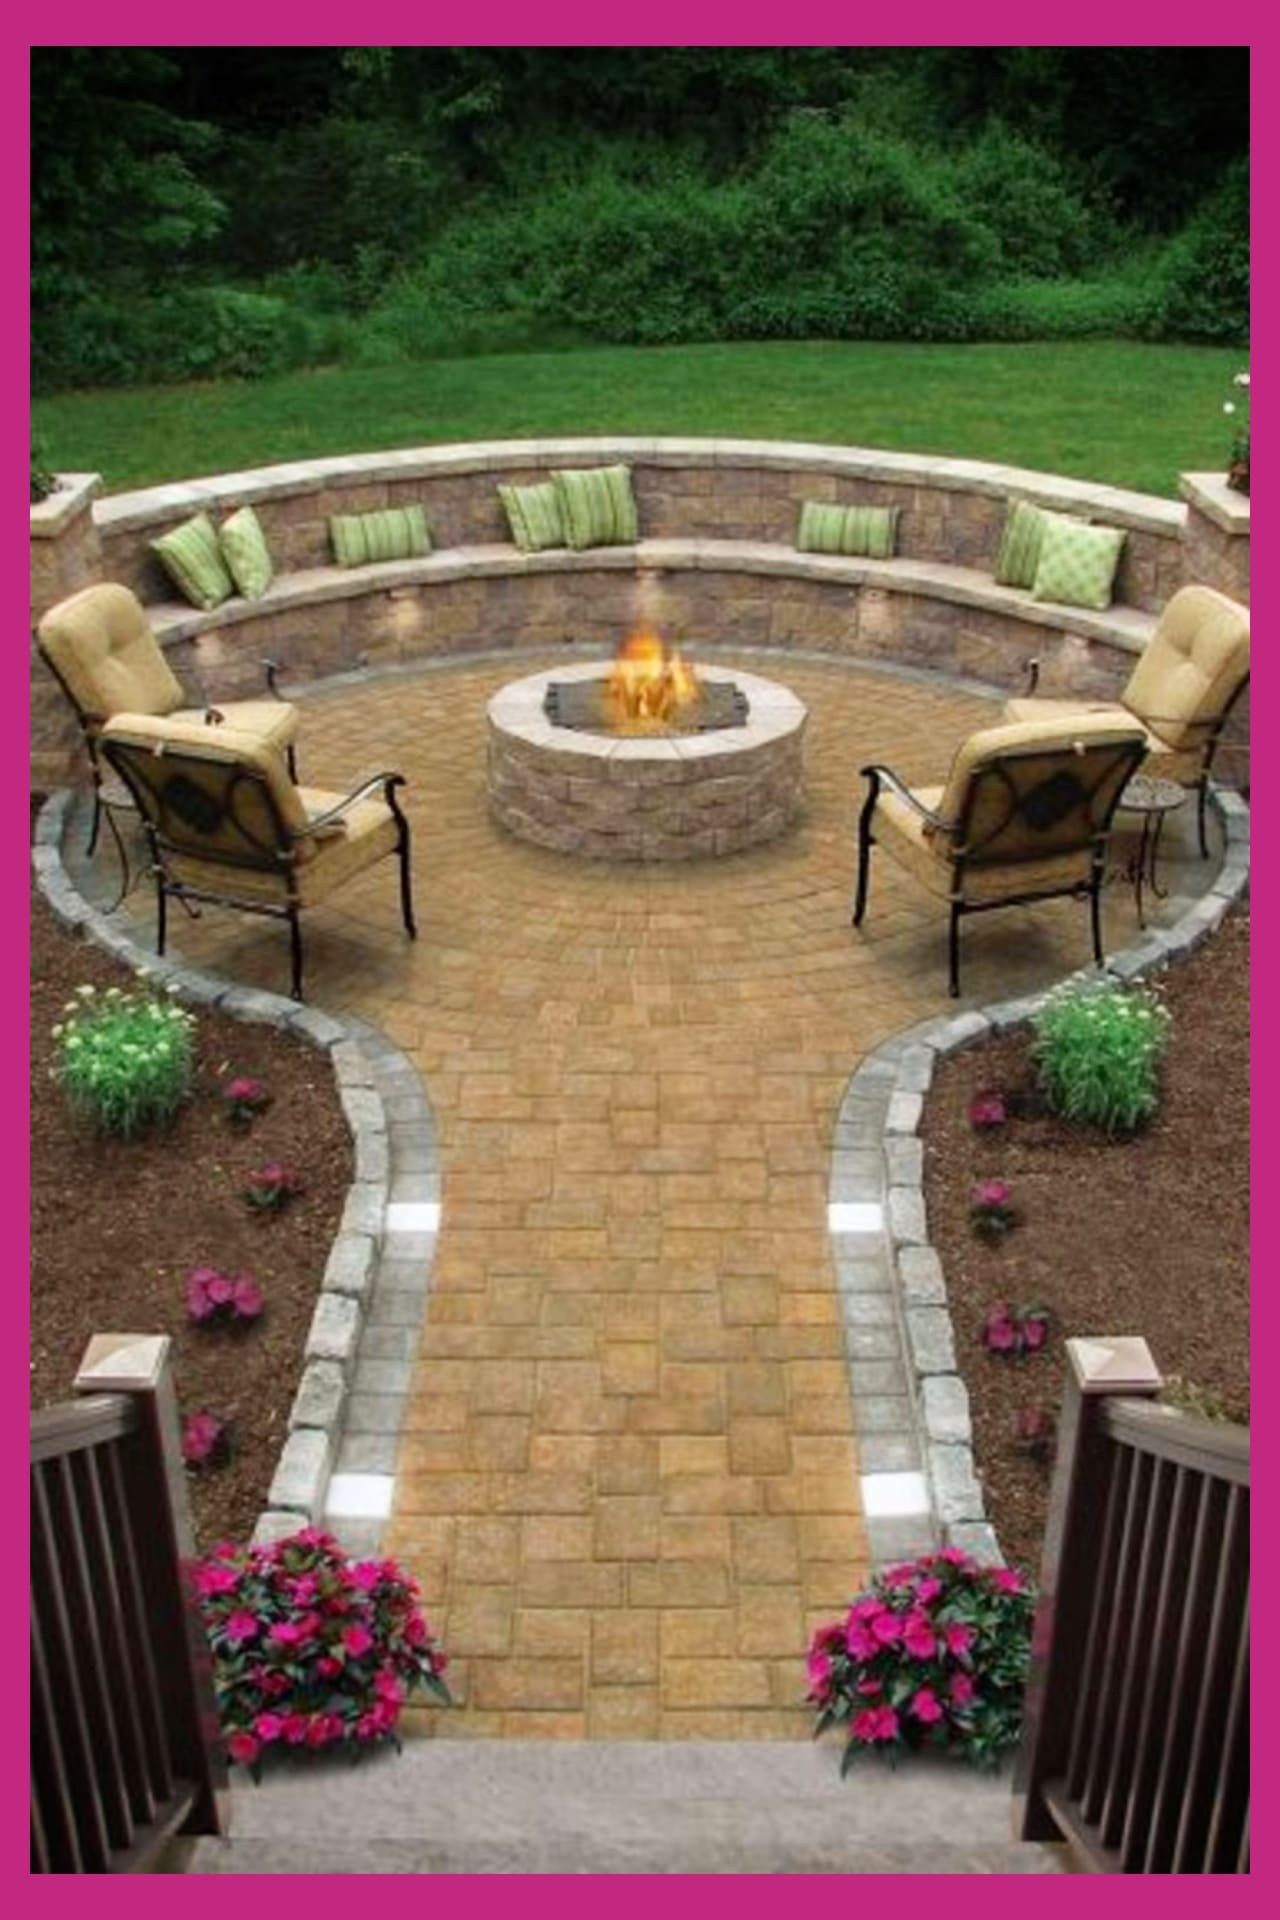 Outdoor Fire Pit Patio
 Backyard Fire Pit Ideas and Designs for Your Yard Deck or